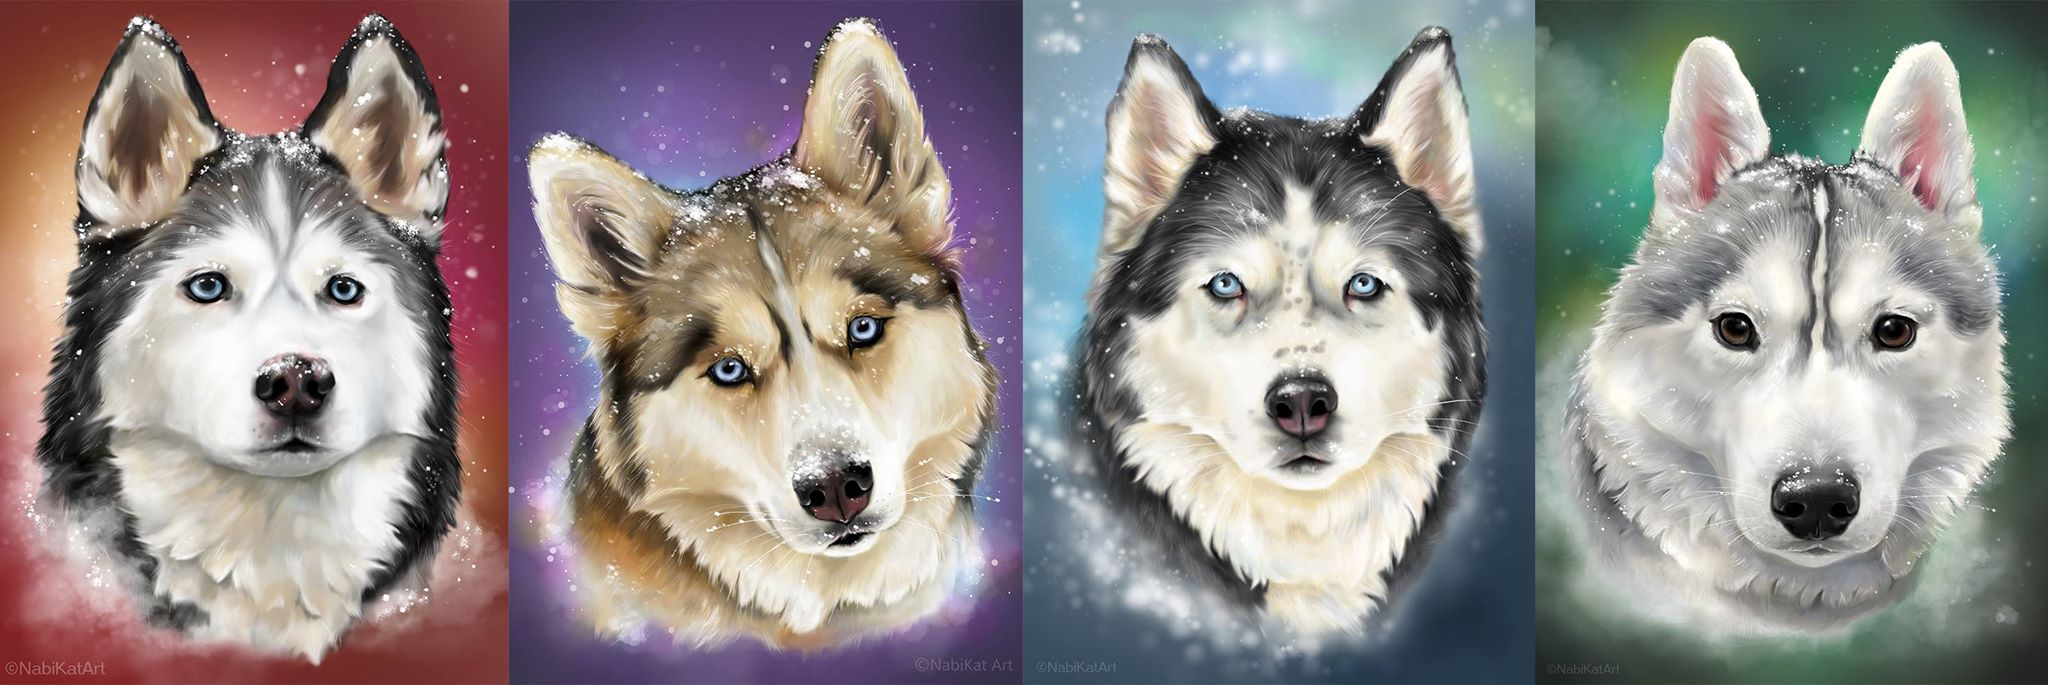 Win these Husky Posters